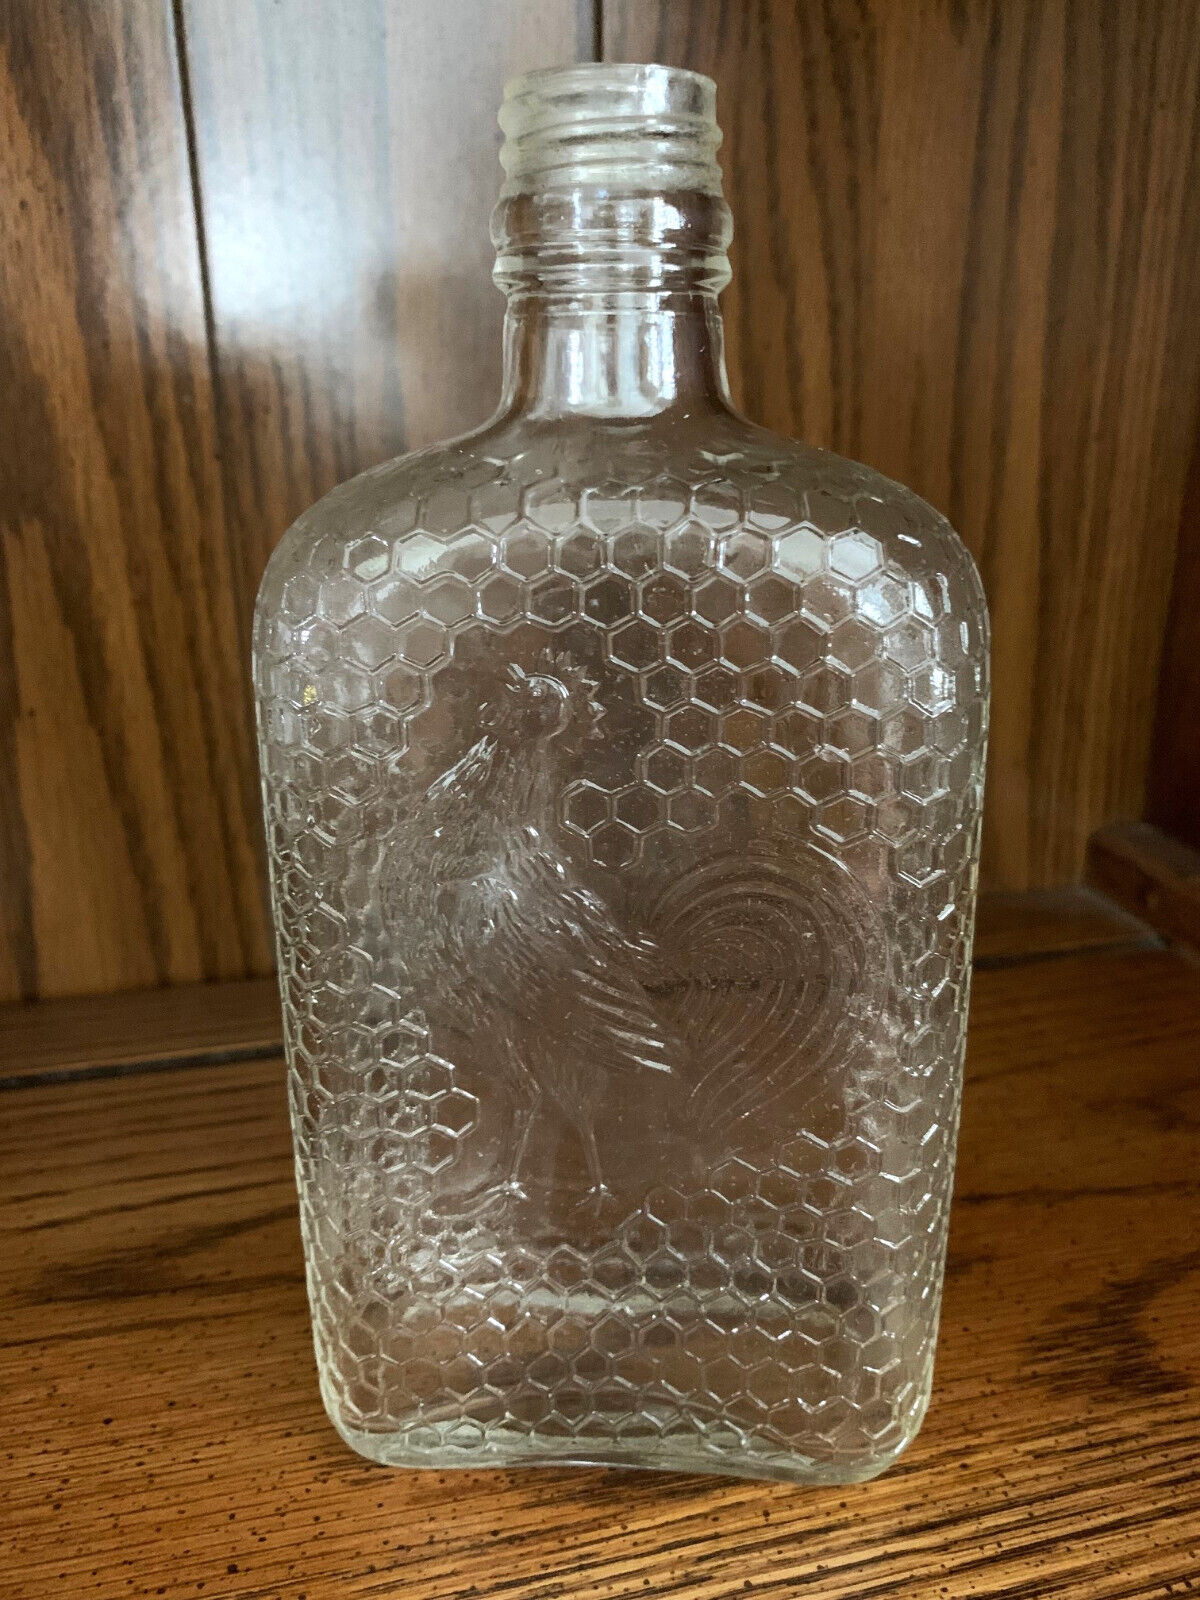 Vintage 1930s Chickencock Cotton Club Rye Whiskey 1 Pint Clear Bottle - EMPTY